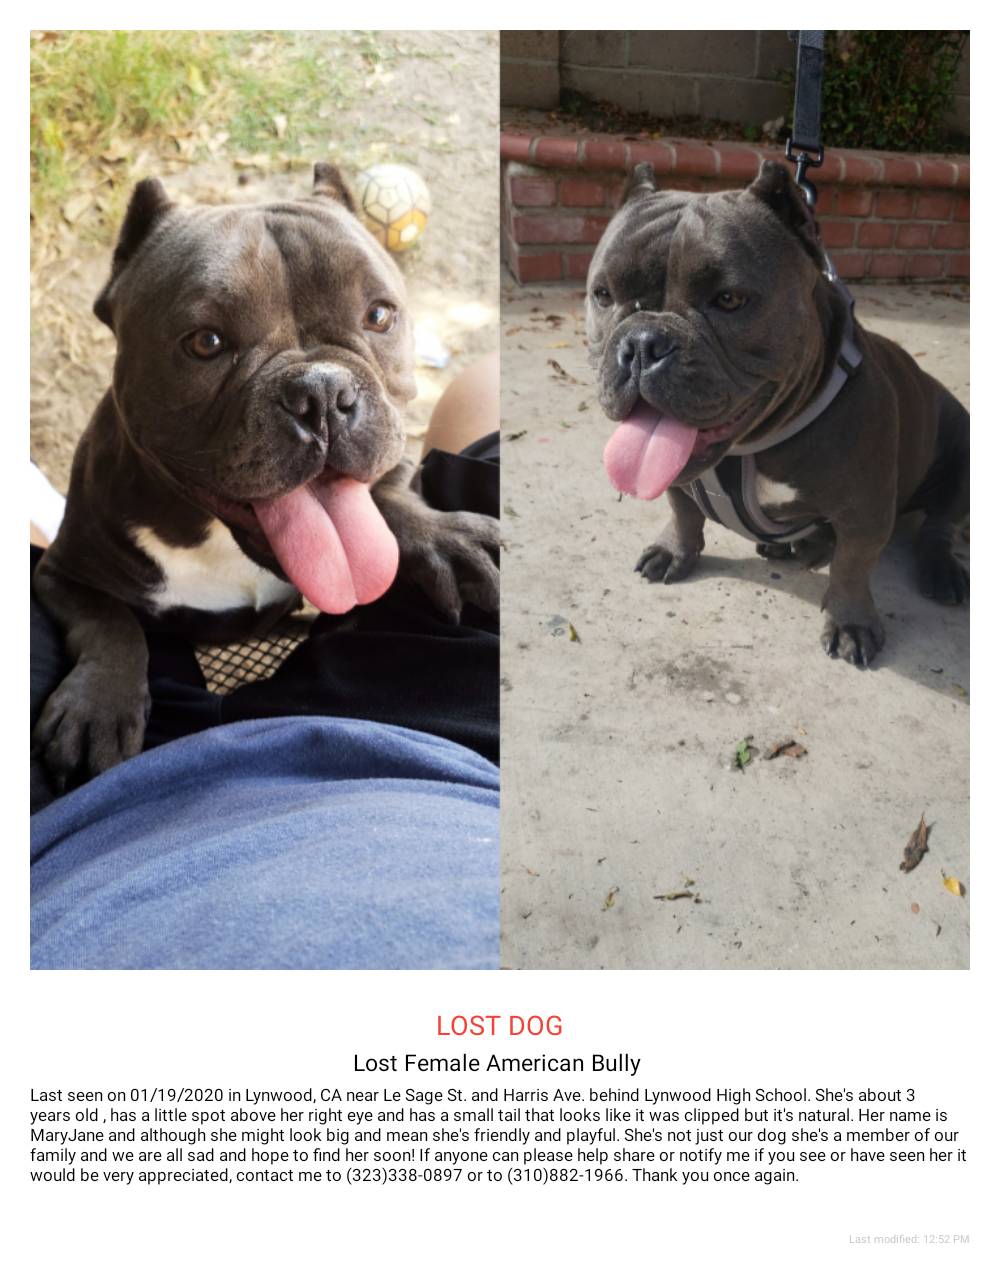 Image of Mary Jane, Lost Dog